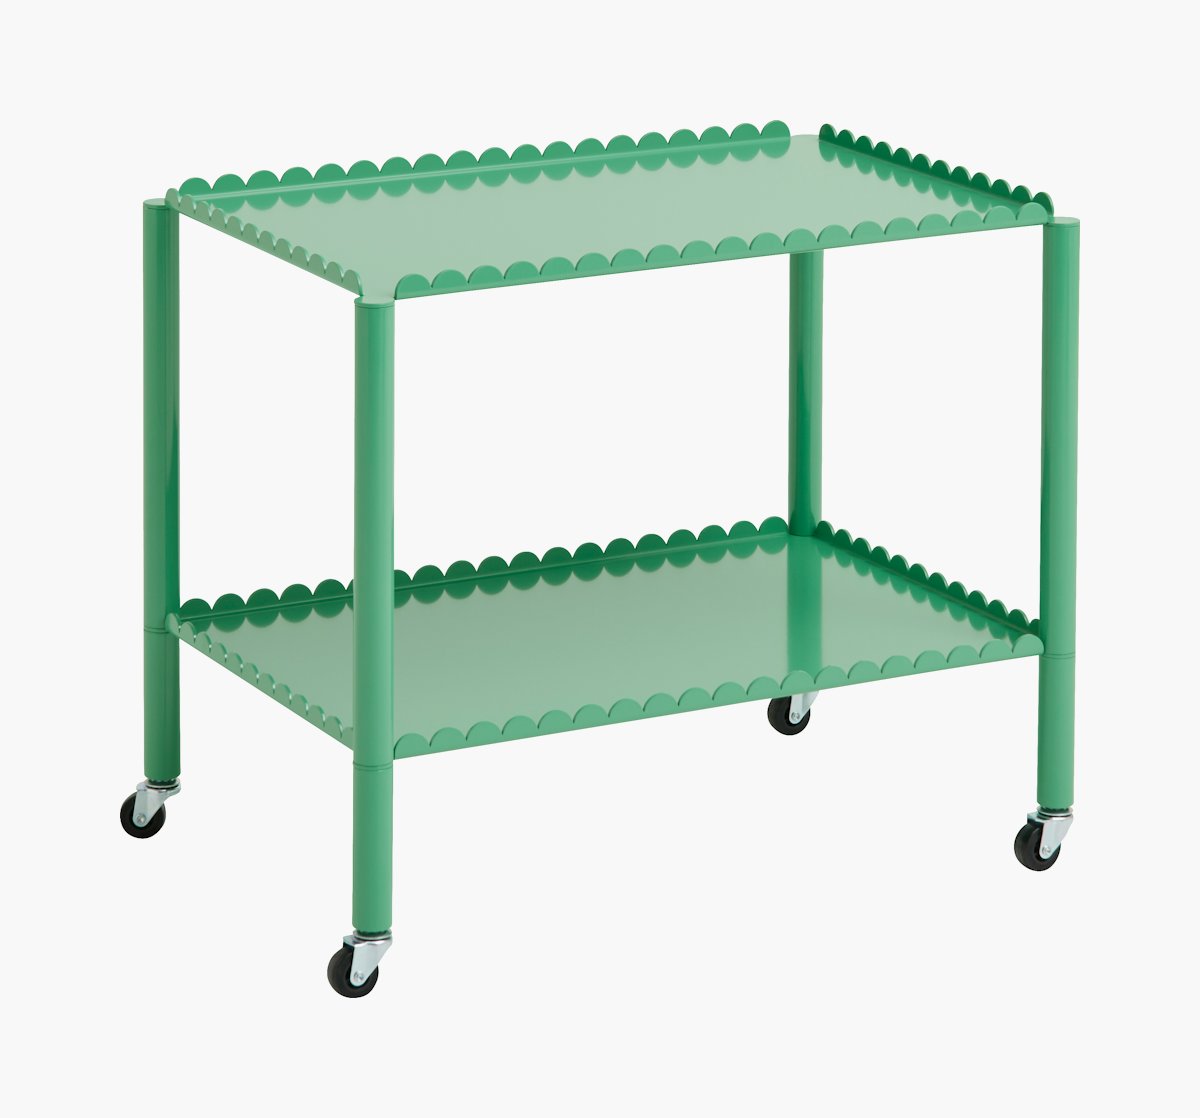 https://images.hermanmiller.group/m/779ca55cdcf2152e/W-HAY_2562243_100417037_jade_green_a.png?trim=auto&trim-sd=2&blend-mode=darken&blend=f8f8f8&bg=f8f8f8&auto=format&w=1200&q=68&h=1200&pad=120&fit=fill